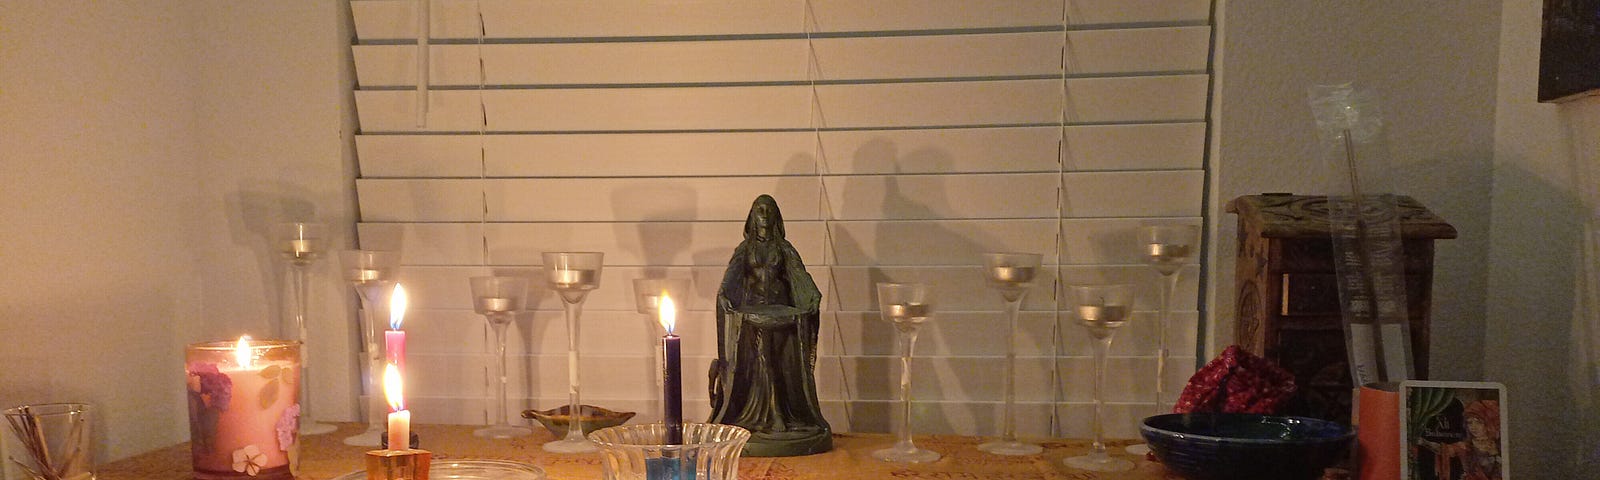 A pagan alter with candles and a statue